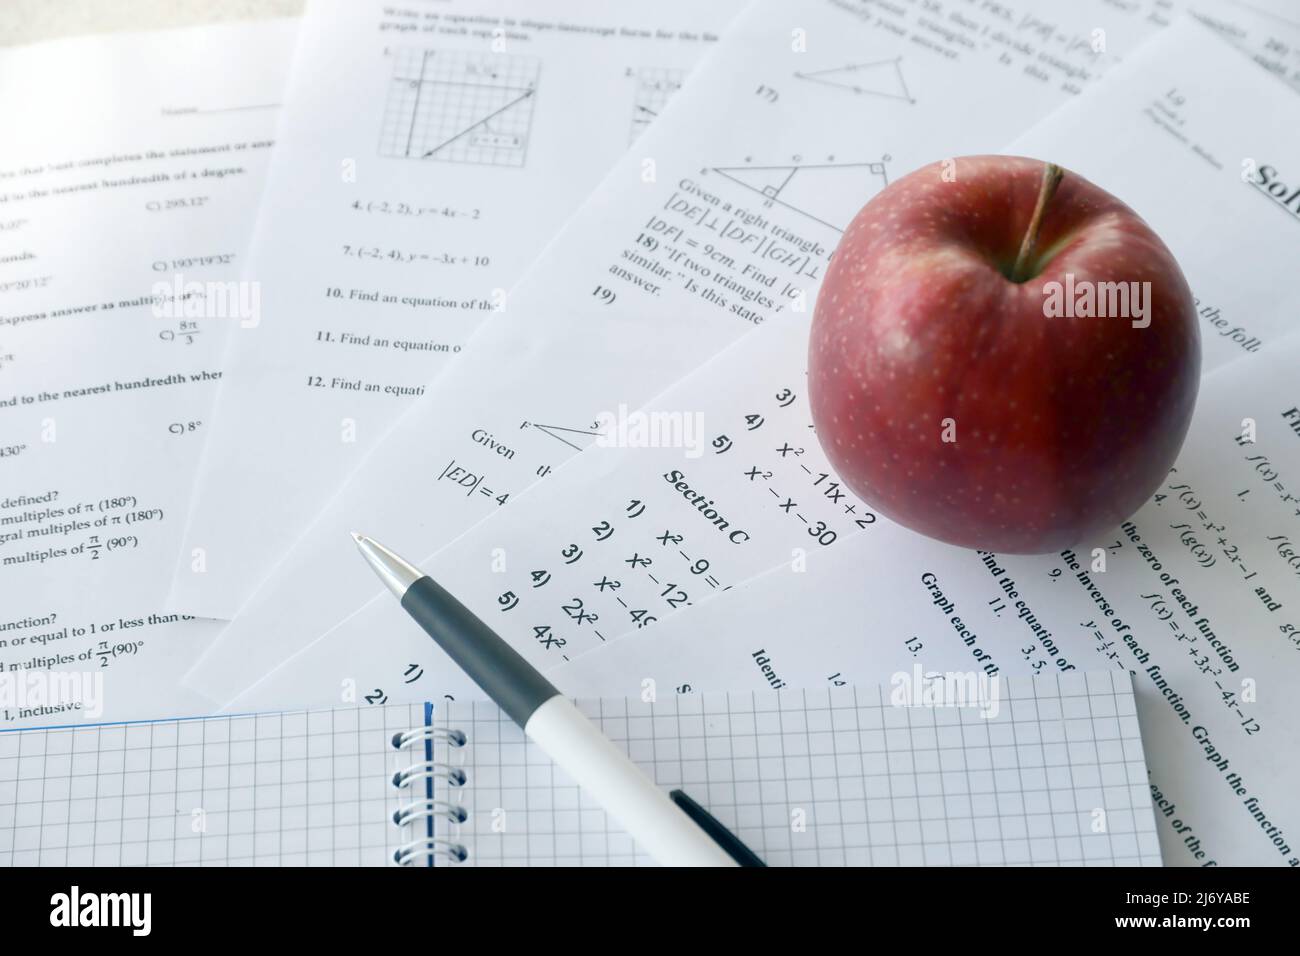 Handwriting of mathematics quadratic equation on examination, practice, quiz or test in maths class. Solving exponential equations background concept. Stock Photo